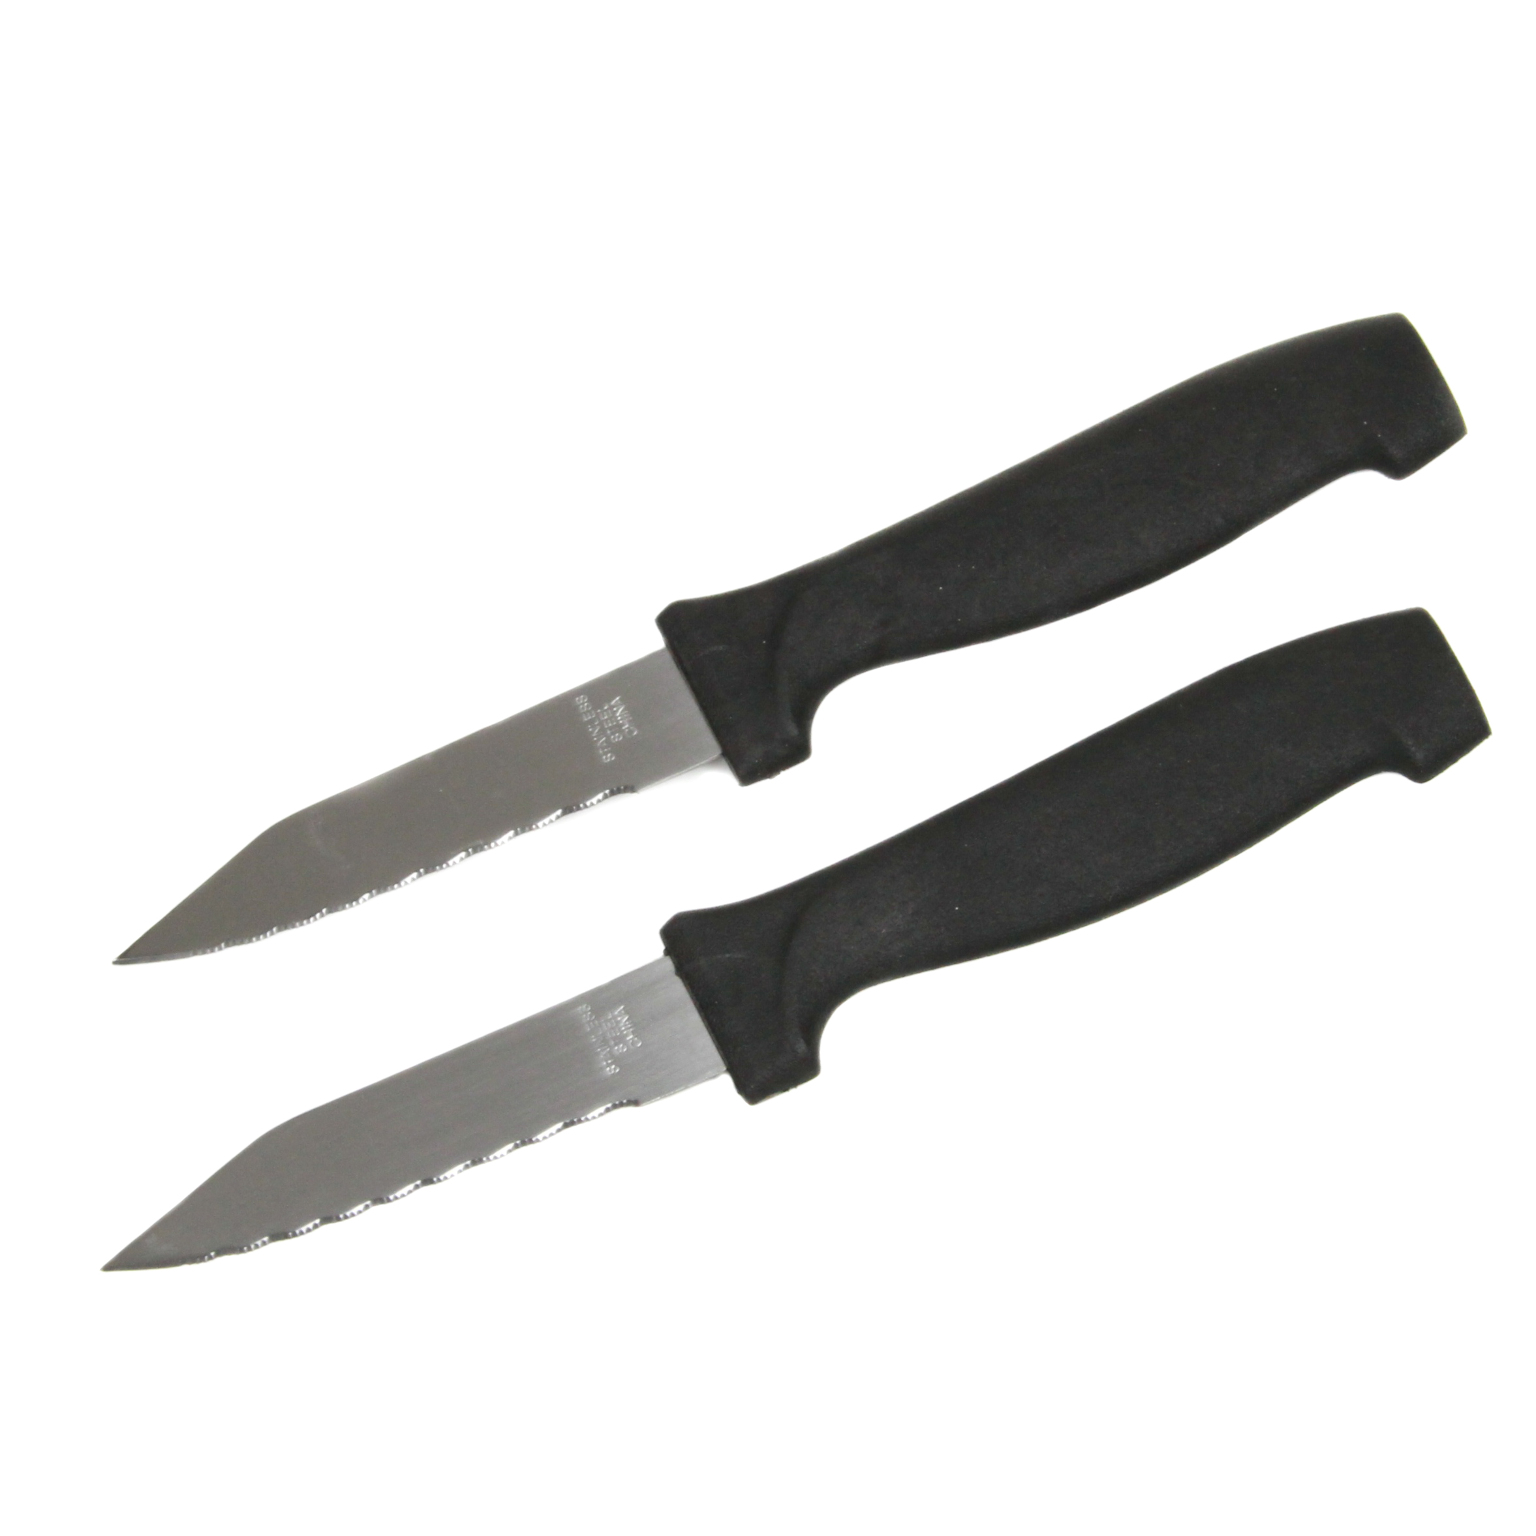 Wholesale 2-Piece Serrated Stainless Steel Paring Knife Set(144x.18)